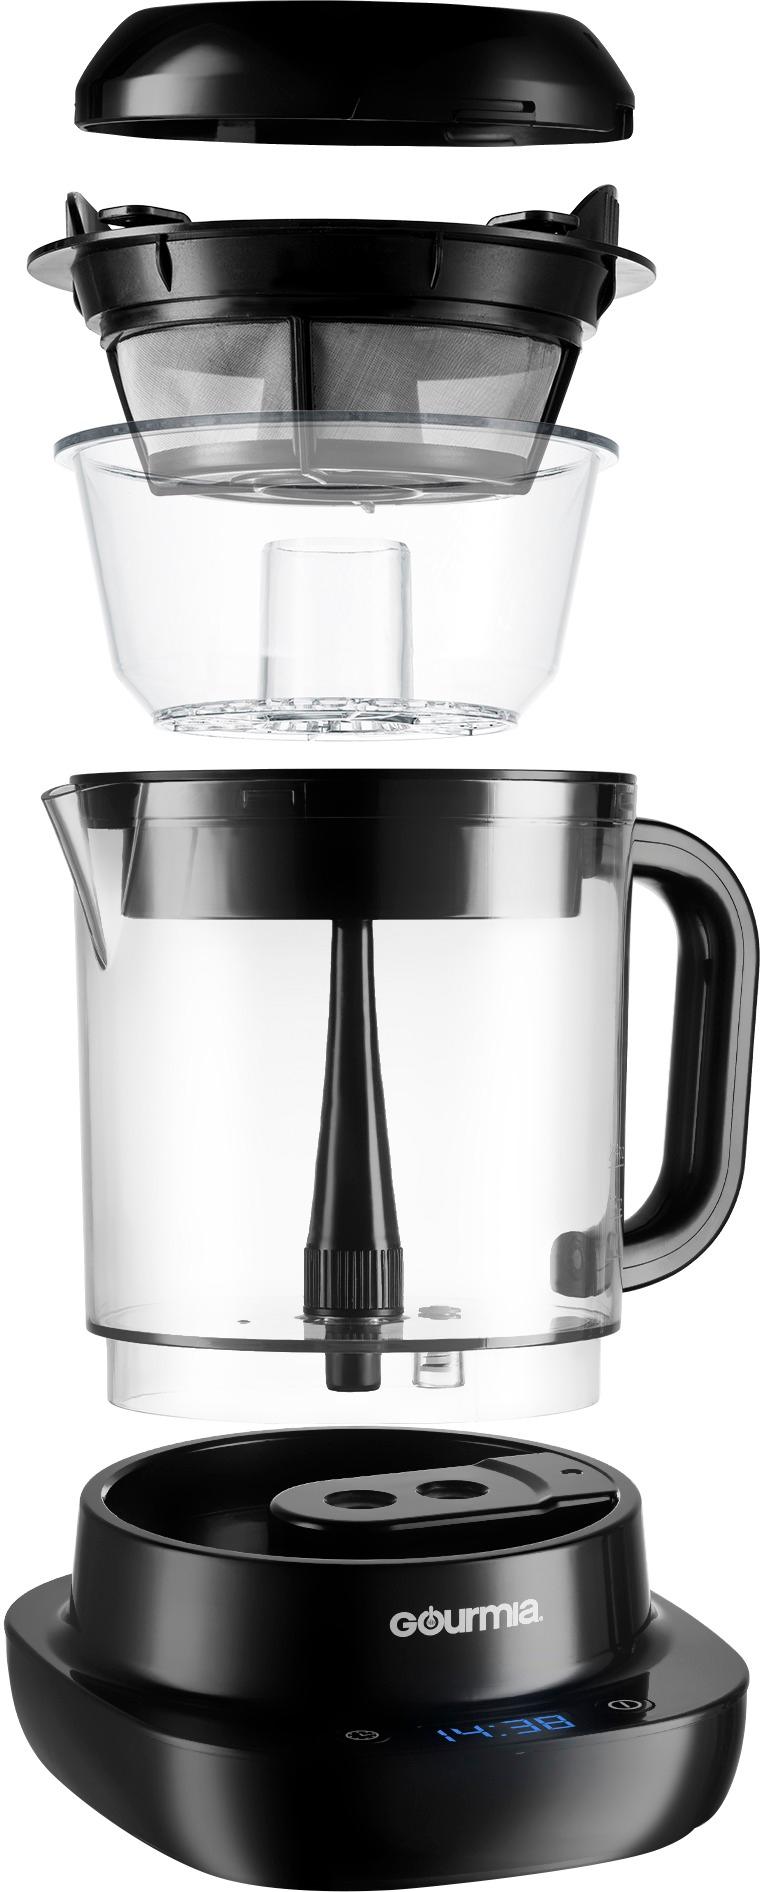 REVIEW Gourmia 12 Cup Hot & Iced Coffee Maker 